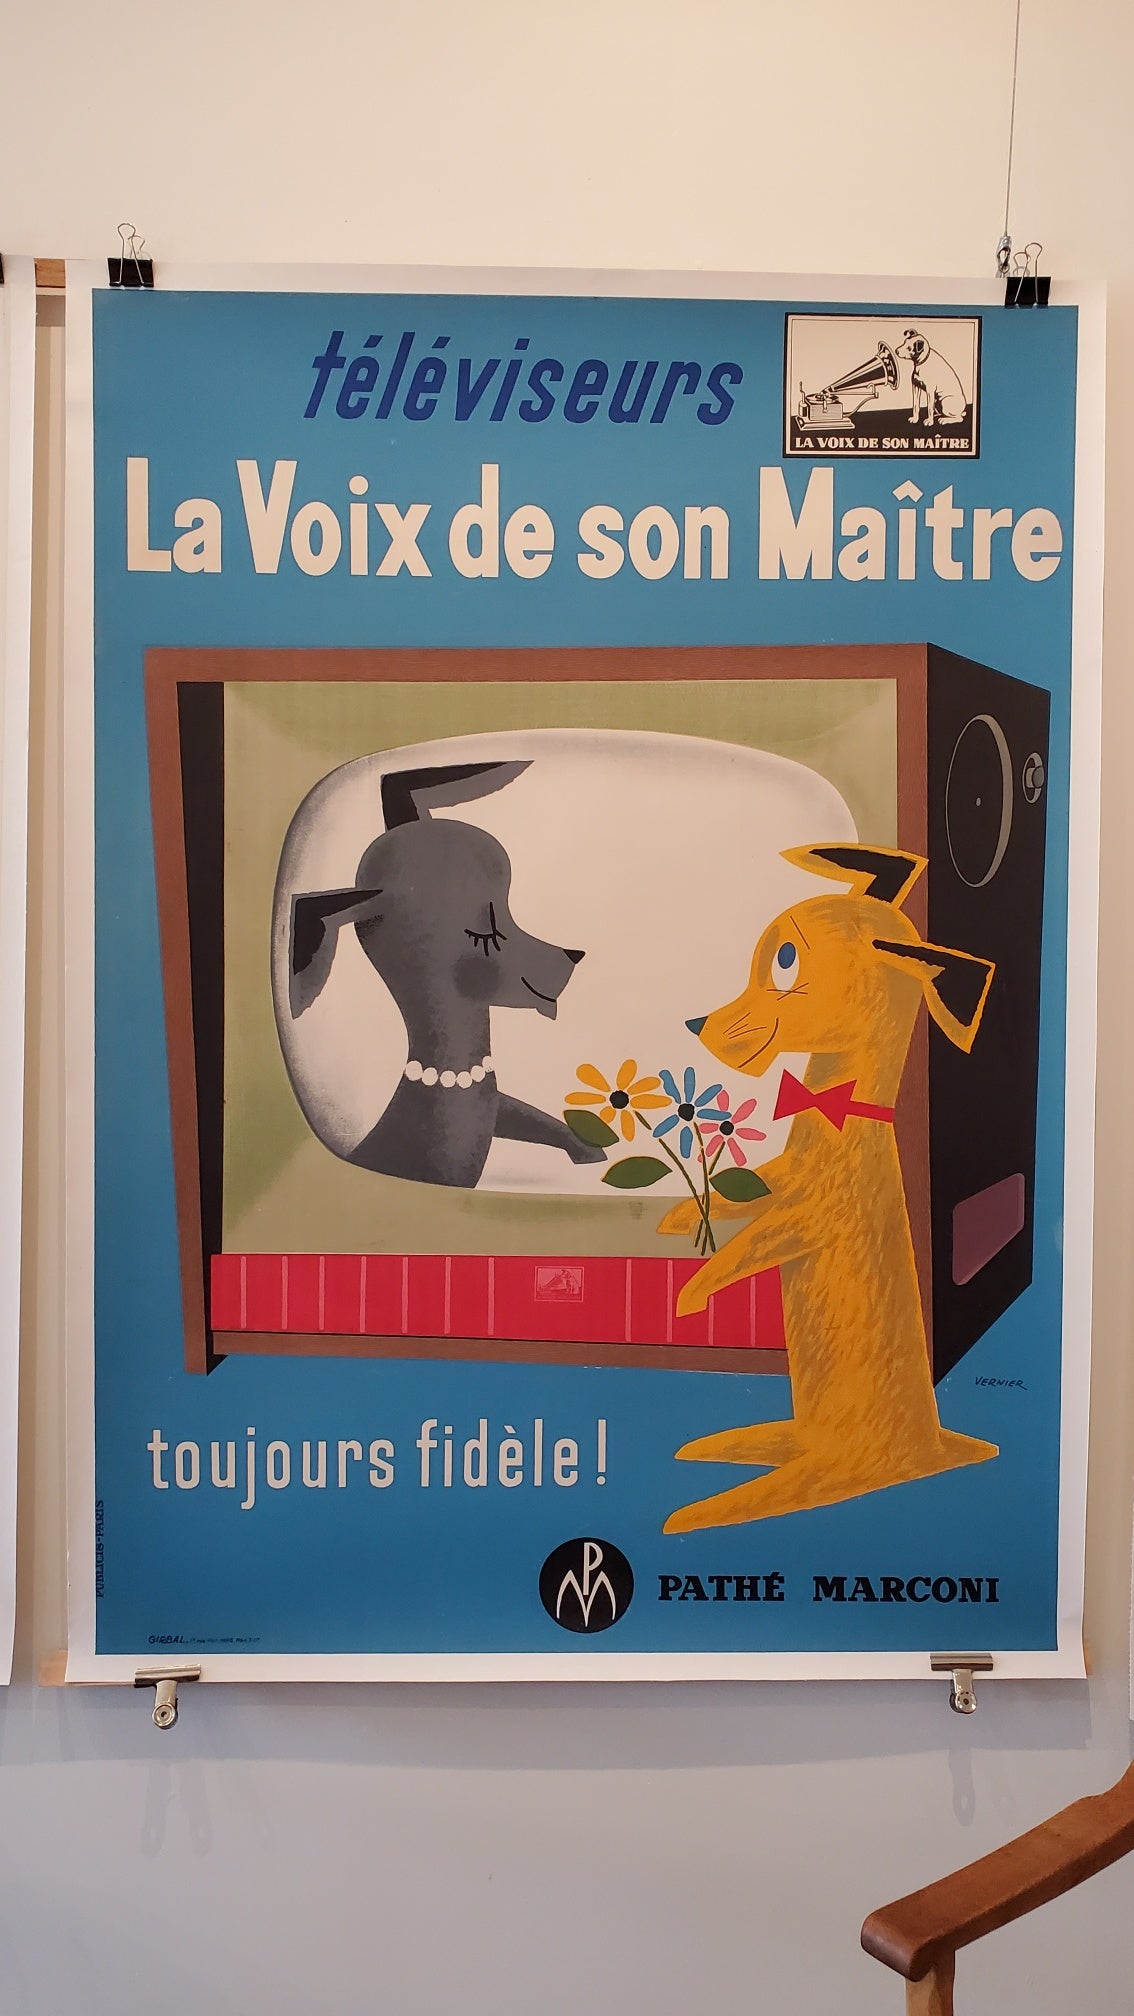 LA VOIX DE SON MAITRE PATHE MARCONIE

This is a unique original poster from 1958 advertising colour TV which had only just been released to the public. In the US in 1954 less than 1% of the population had a colour TV. 

This poster is linen